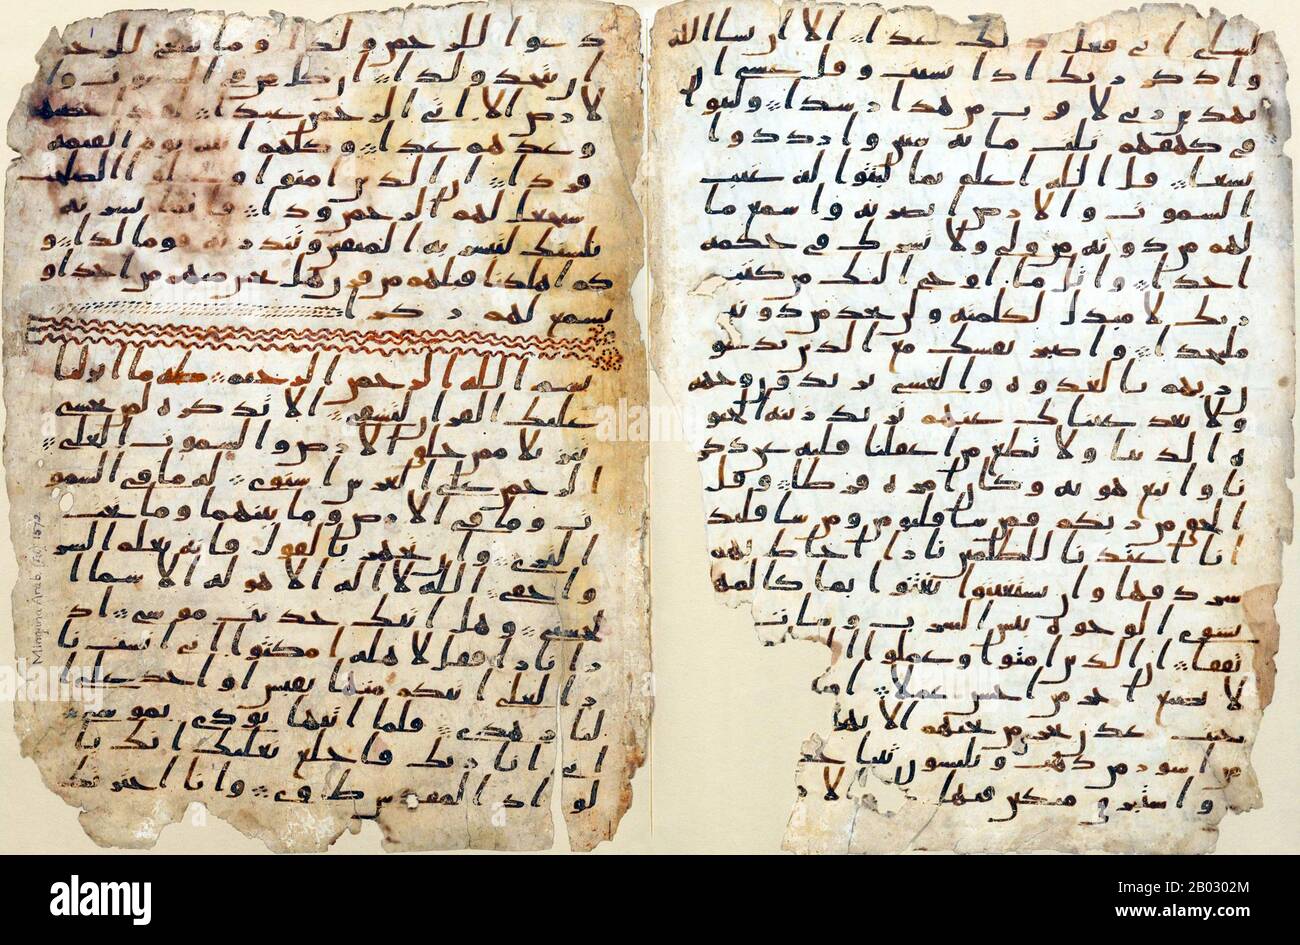 Two leaves of an early Quranic manuscript in the Mingana Collection of Middle Eastern manuscripts of the University of Birmingham's Cadbury Research Library were identified in 2015 as being dated between 568 and 645, making this the oldest Quran manuscripts to date.  The manuscript is written in ink on parchment, using a monumental Arabic Hijazi script and is still clearly legible. The leaves preserve parts of Surahs 18 to 20.  The university intends to place the manuscript on display for the first time at the Barber Institute of Fine Arts during October 2015, and then at the Birmingham Museum Stock Photo